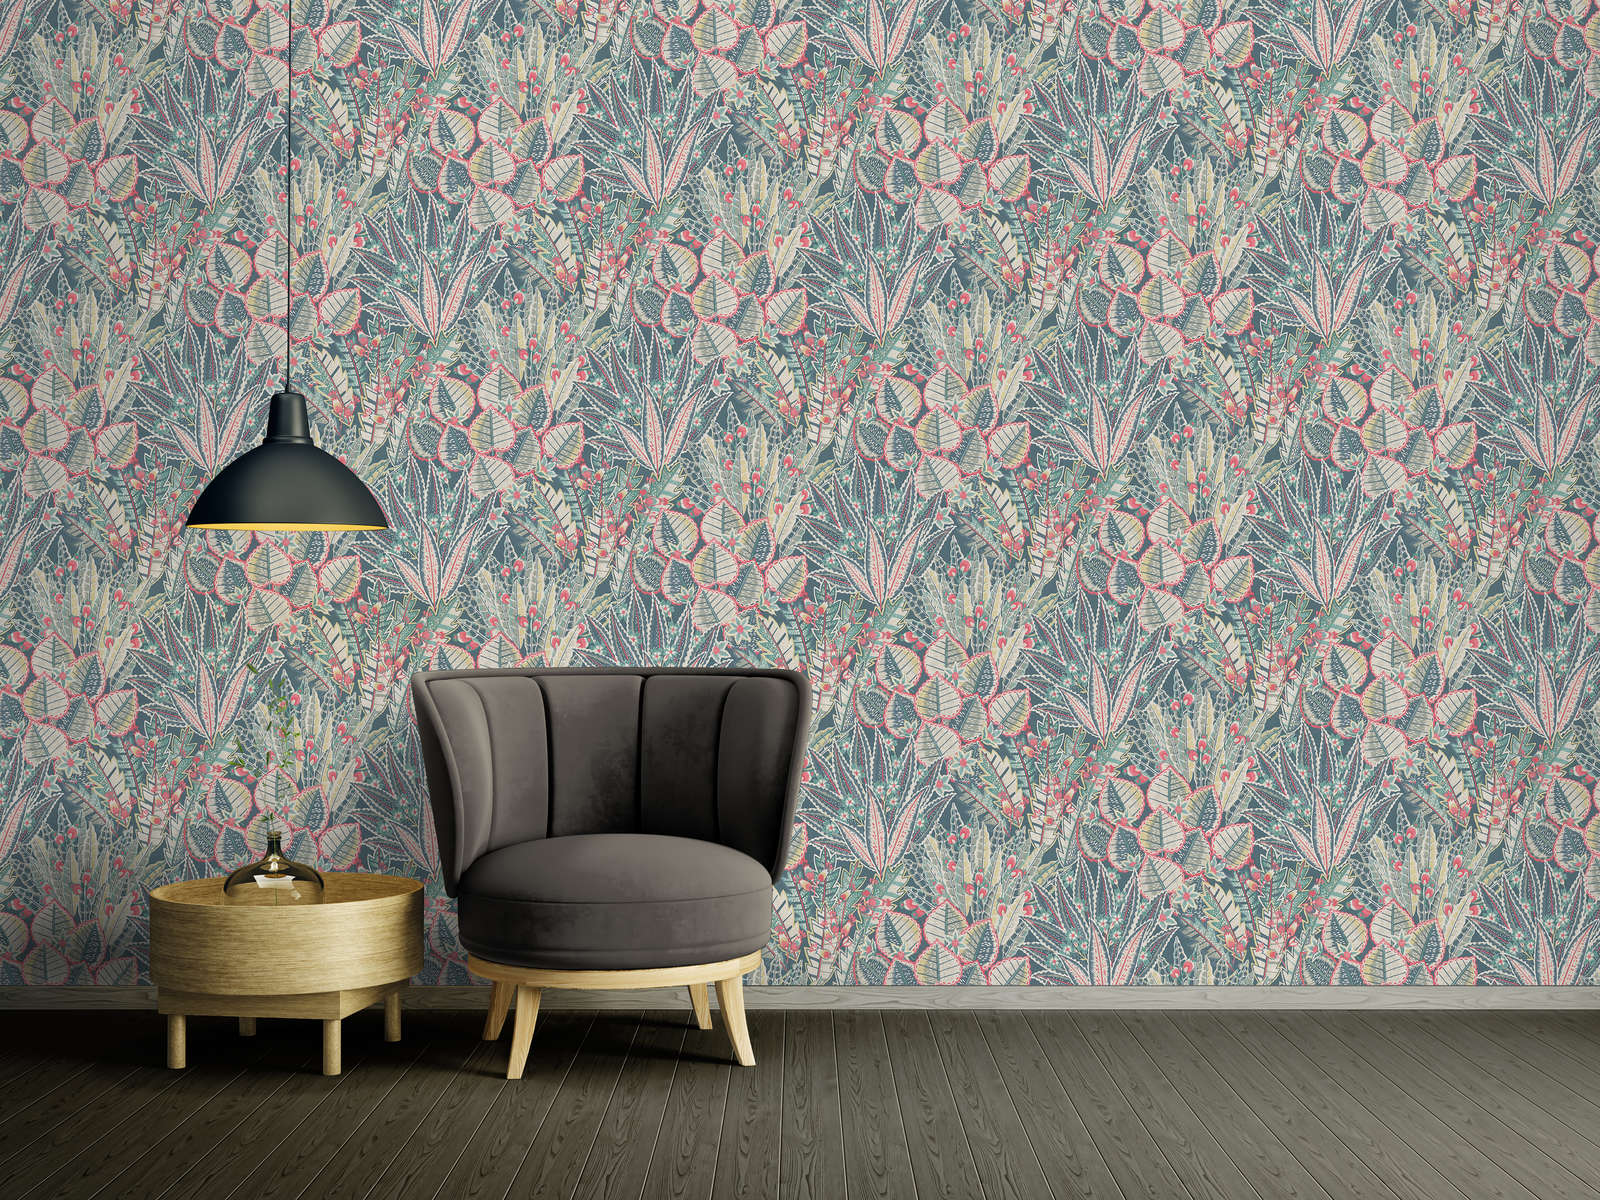             Non-woven wallpaper with leaf pattern in jungle look - blue, green, red
        